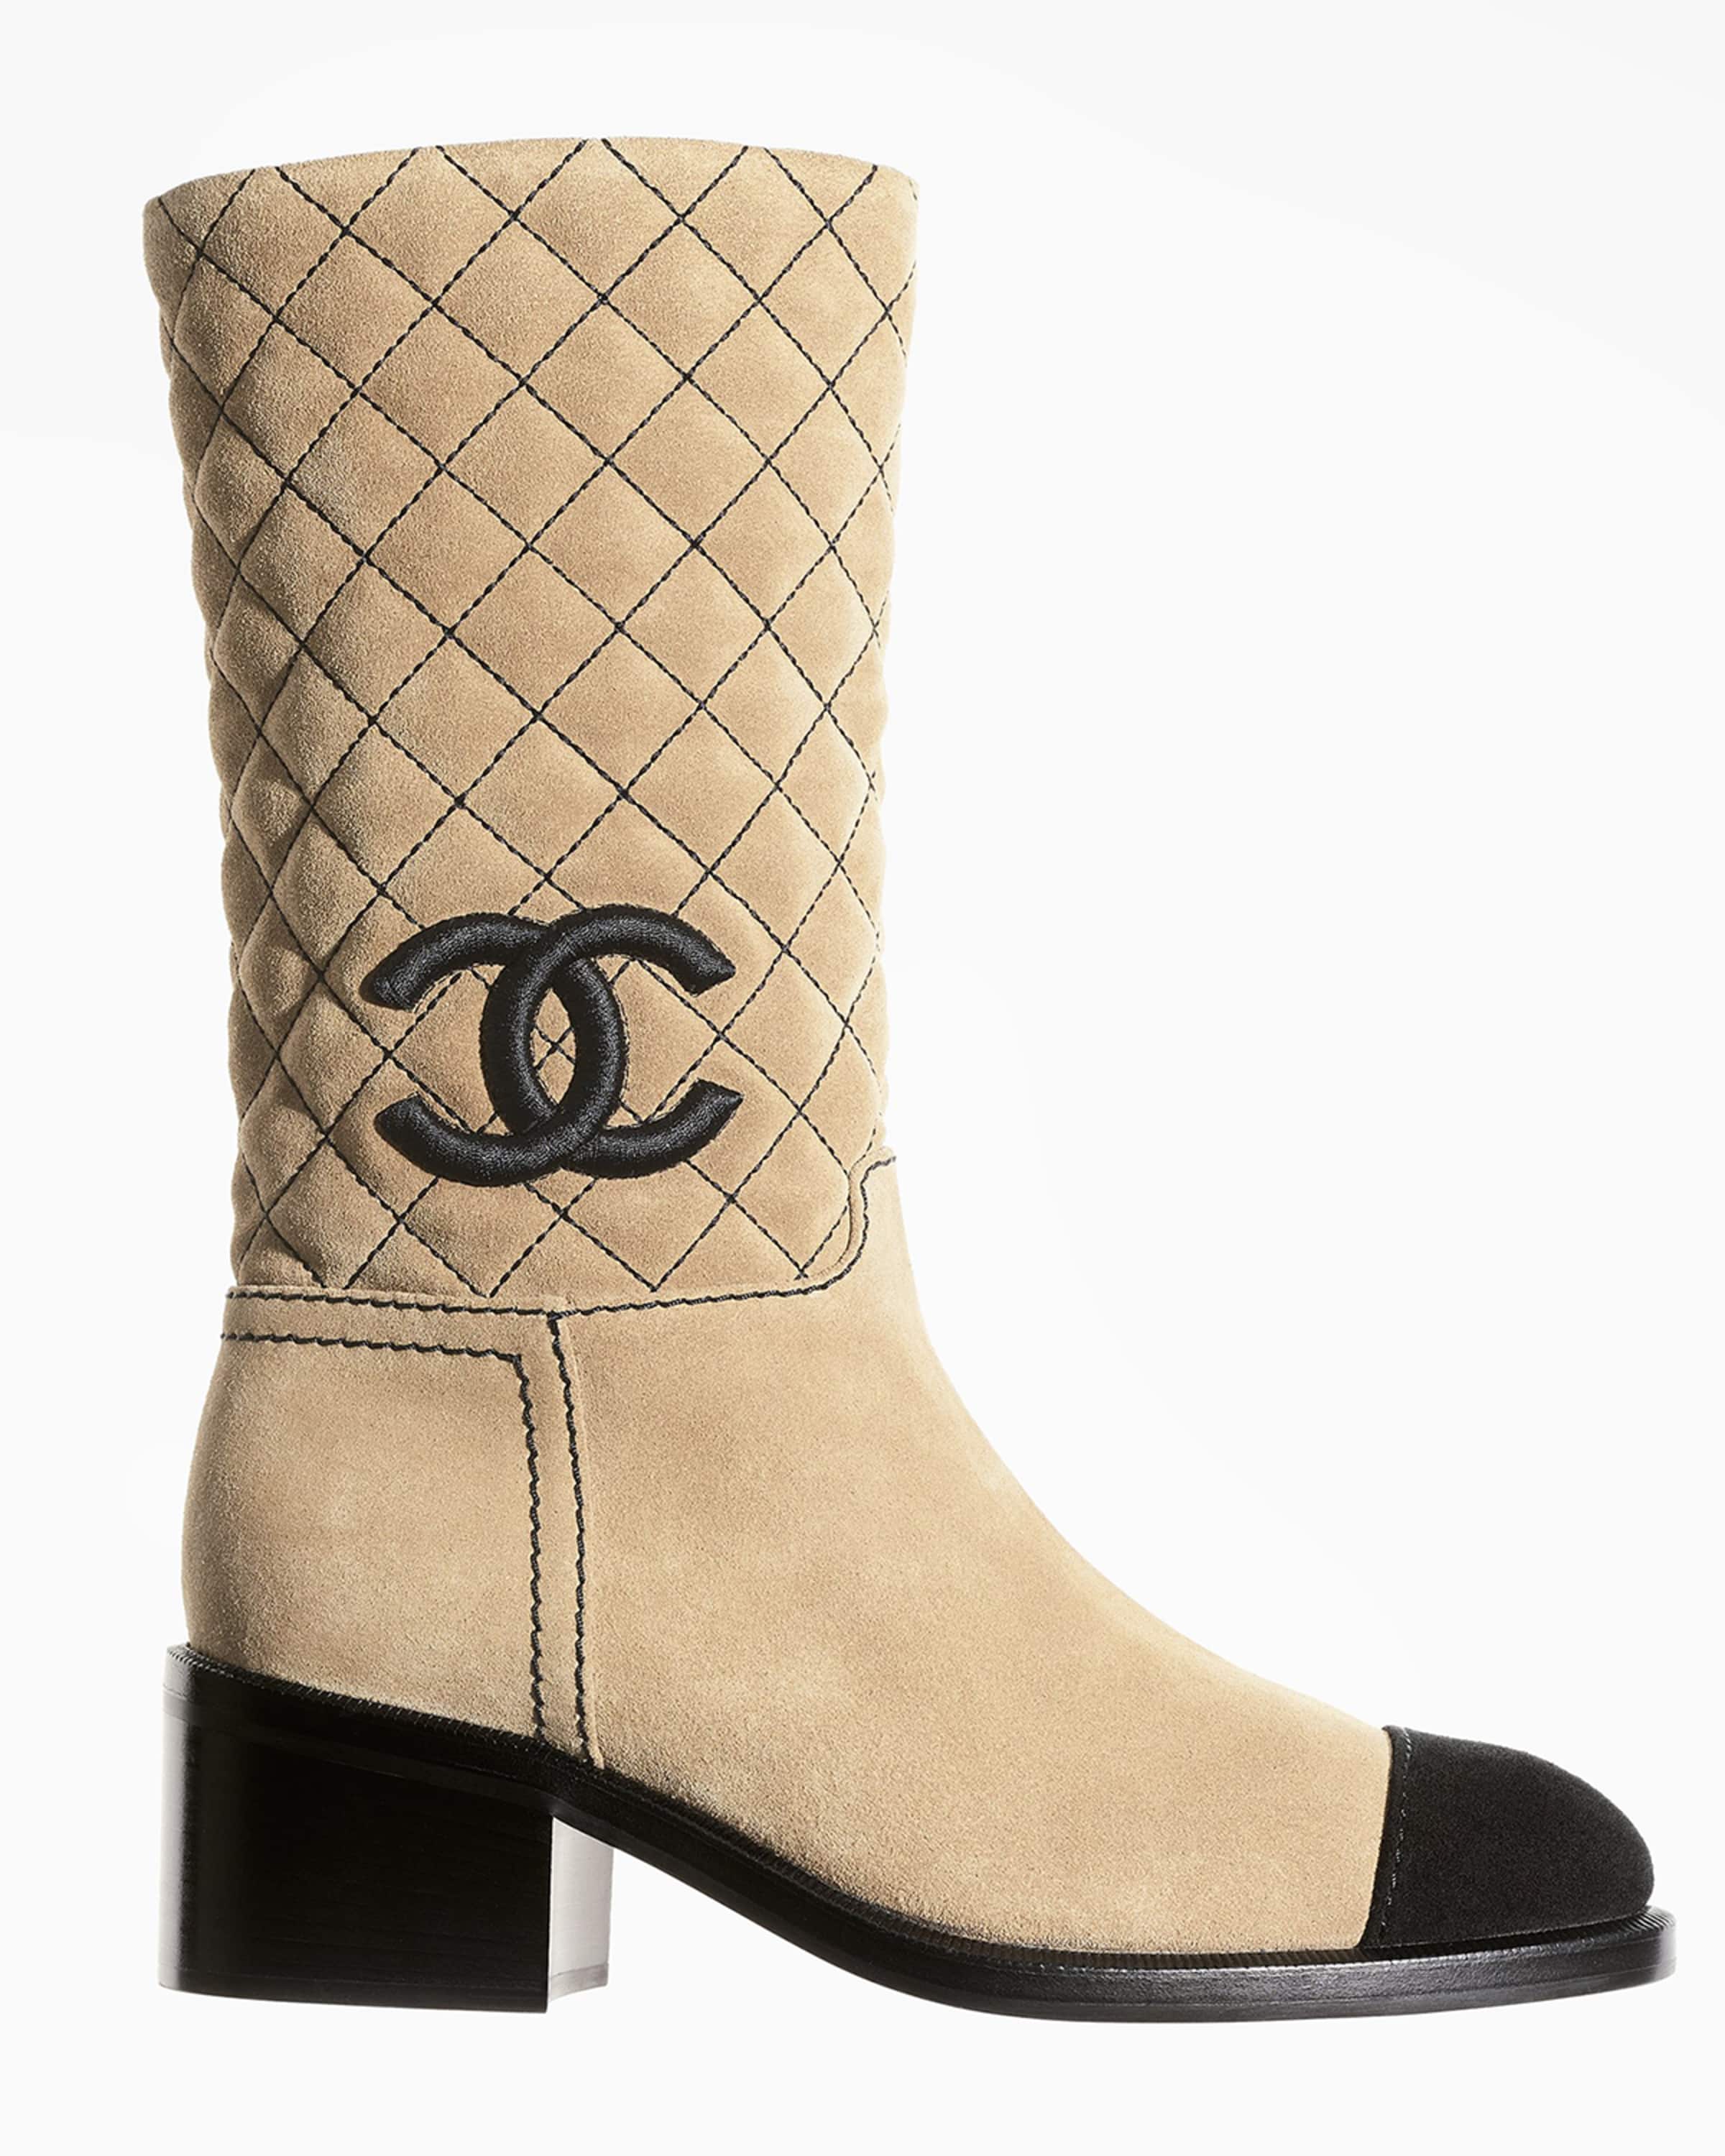 CHANEL 50MM CC QUILT HIGH BOOTS | Neiman Marcus